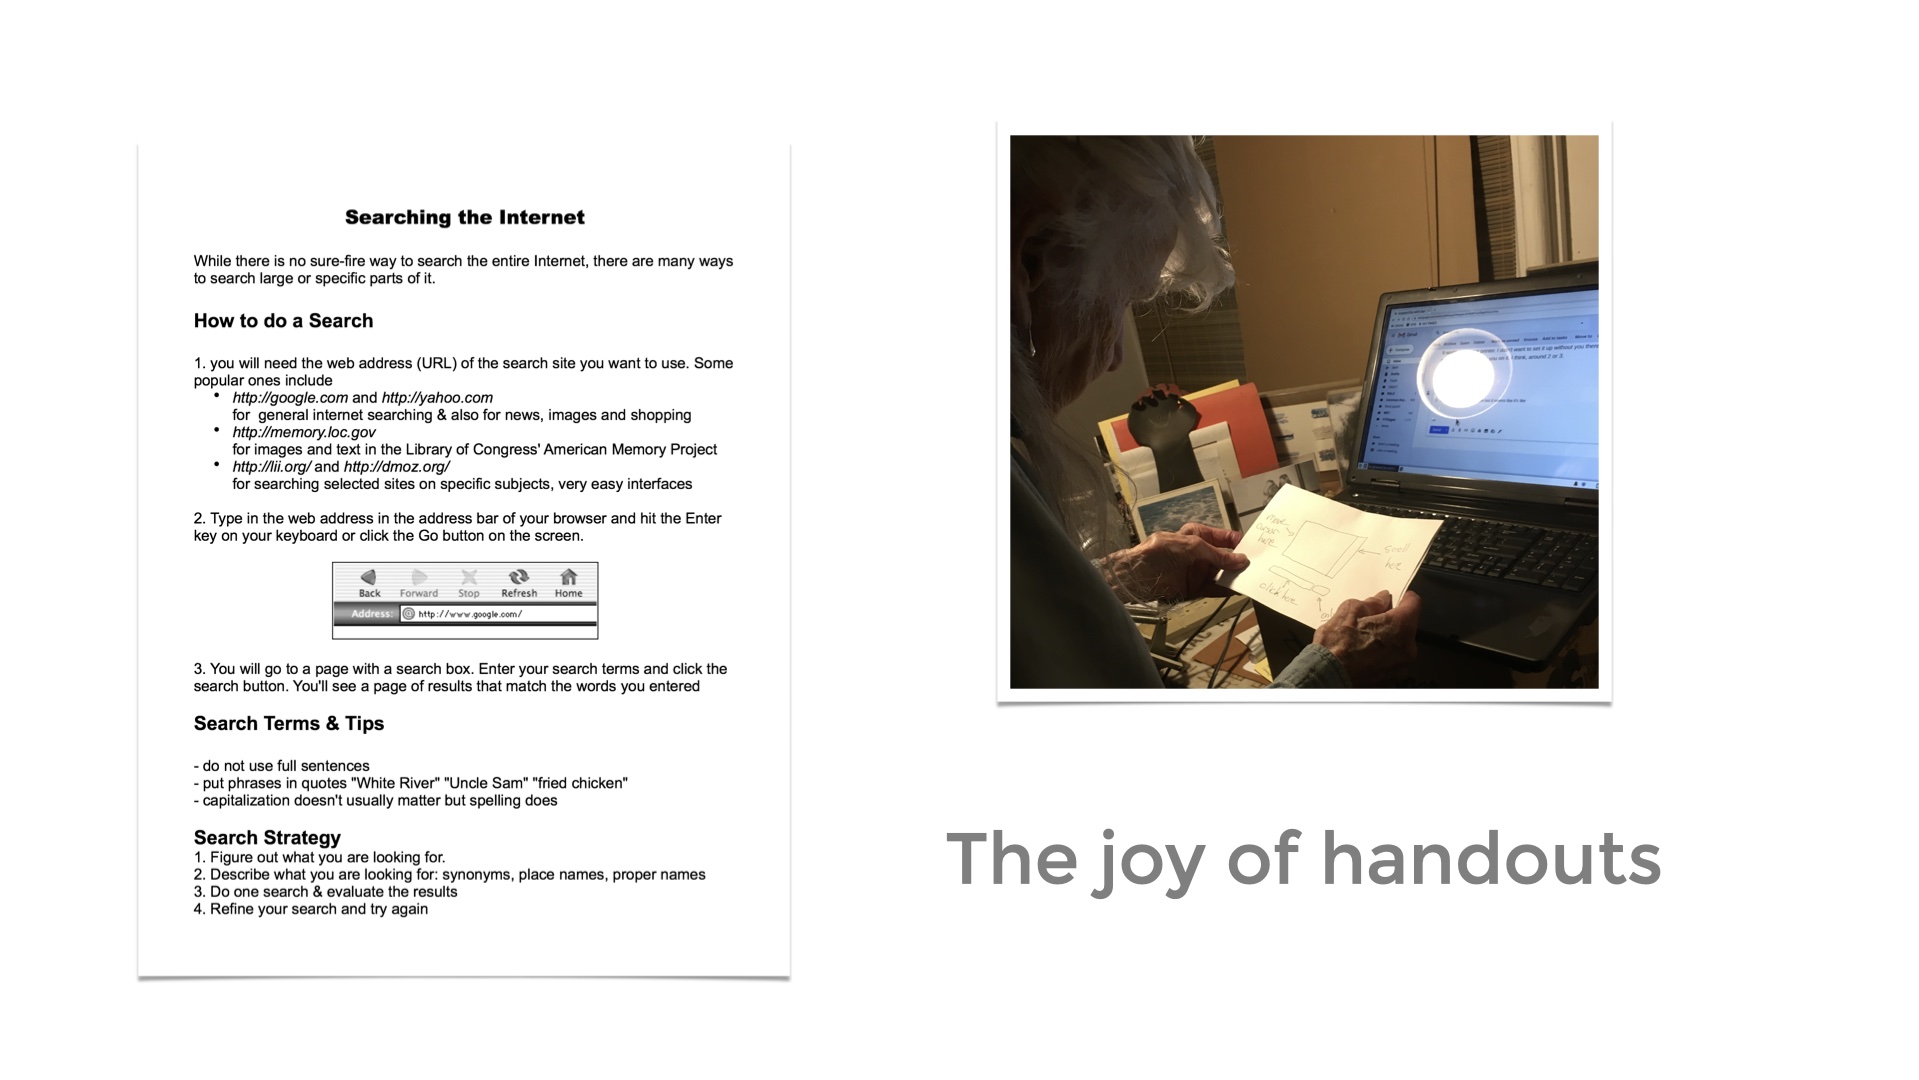 Image of a woman looking at a handout near her laptop. Inset image of a handout titled Searching the Interet. Text: The joy of handouts